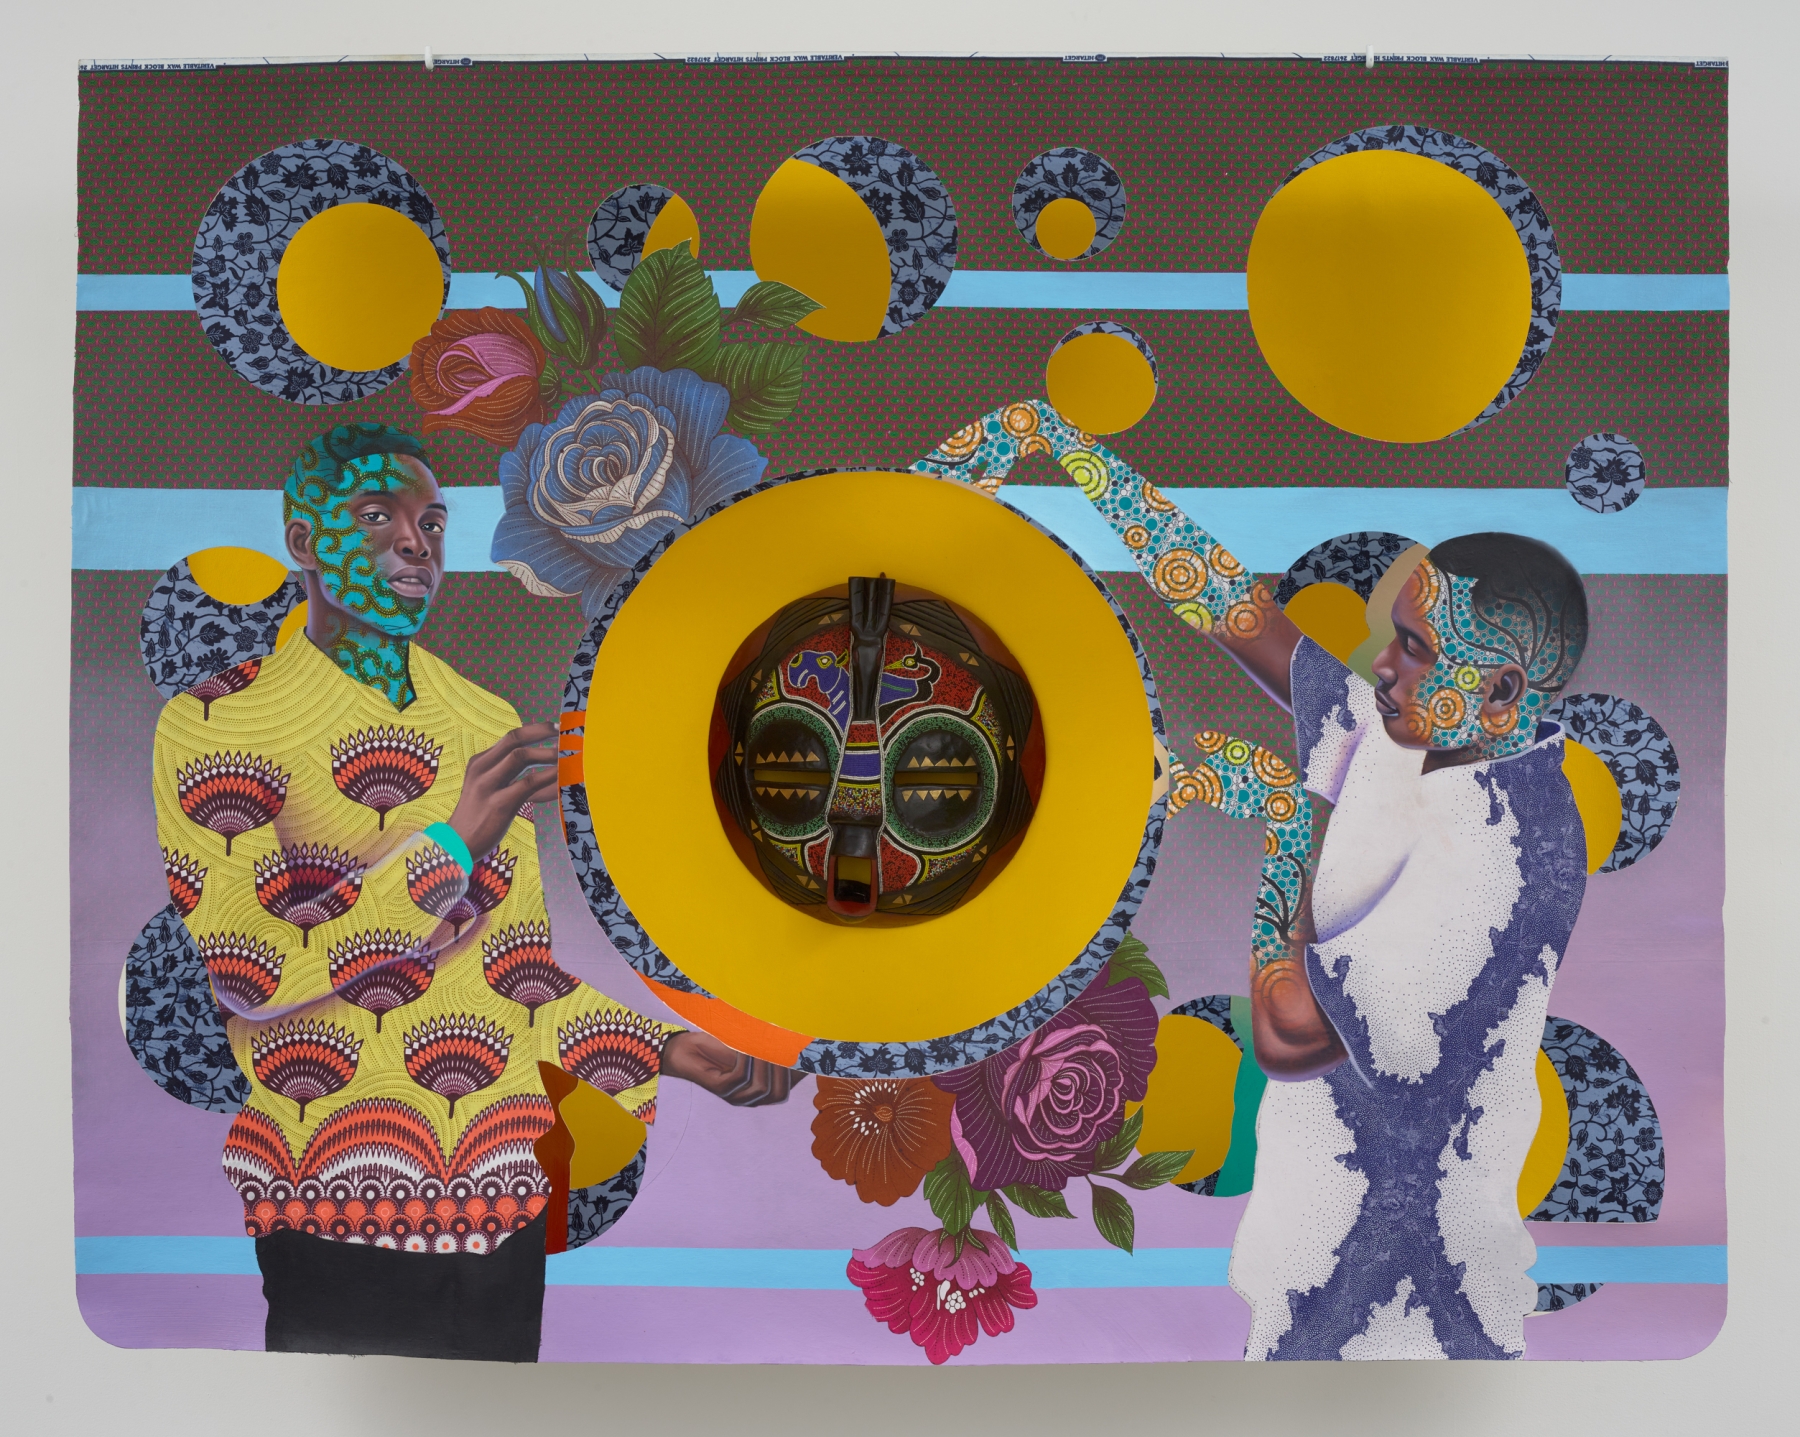 Patrick Quarm
Place of Abode, 2022
mixed media, oil and acrylic paint on African print fabric, resin, 3 layers
68 x 82 x 24 inches&amp;nbsp;